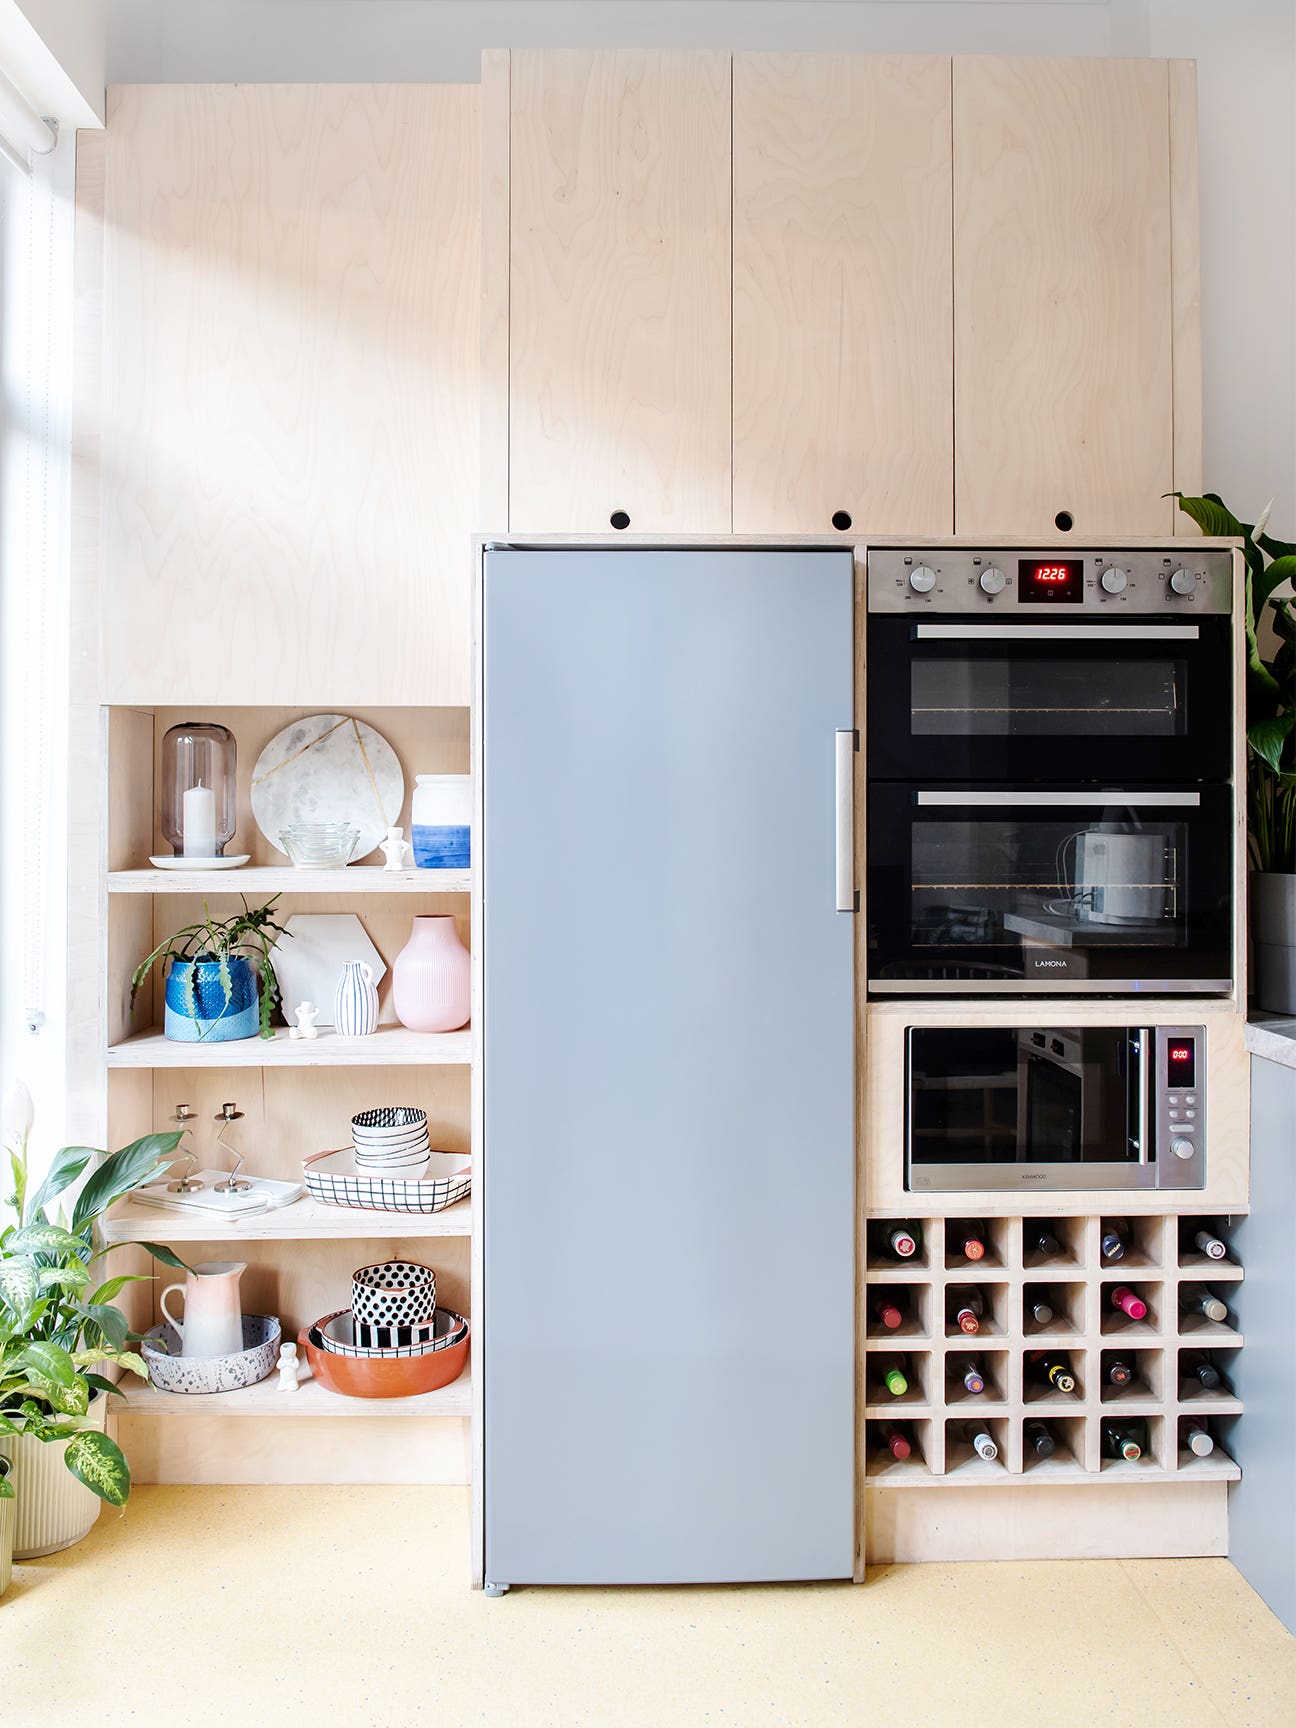 This Kitchen Reno Relied on a Hardware Store Staple